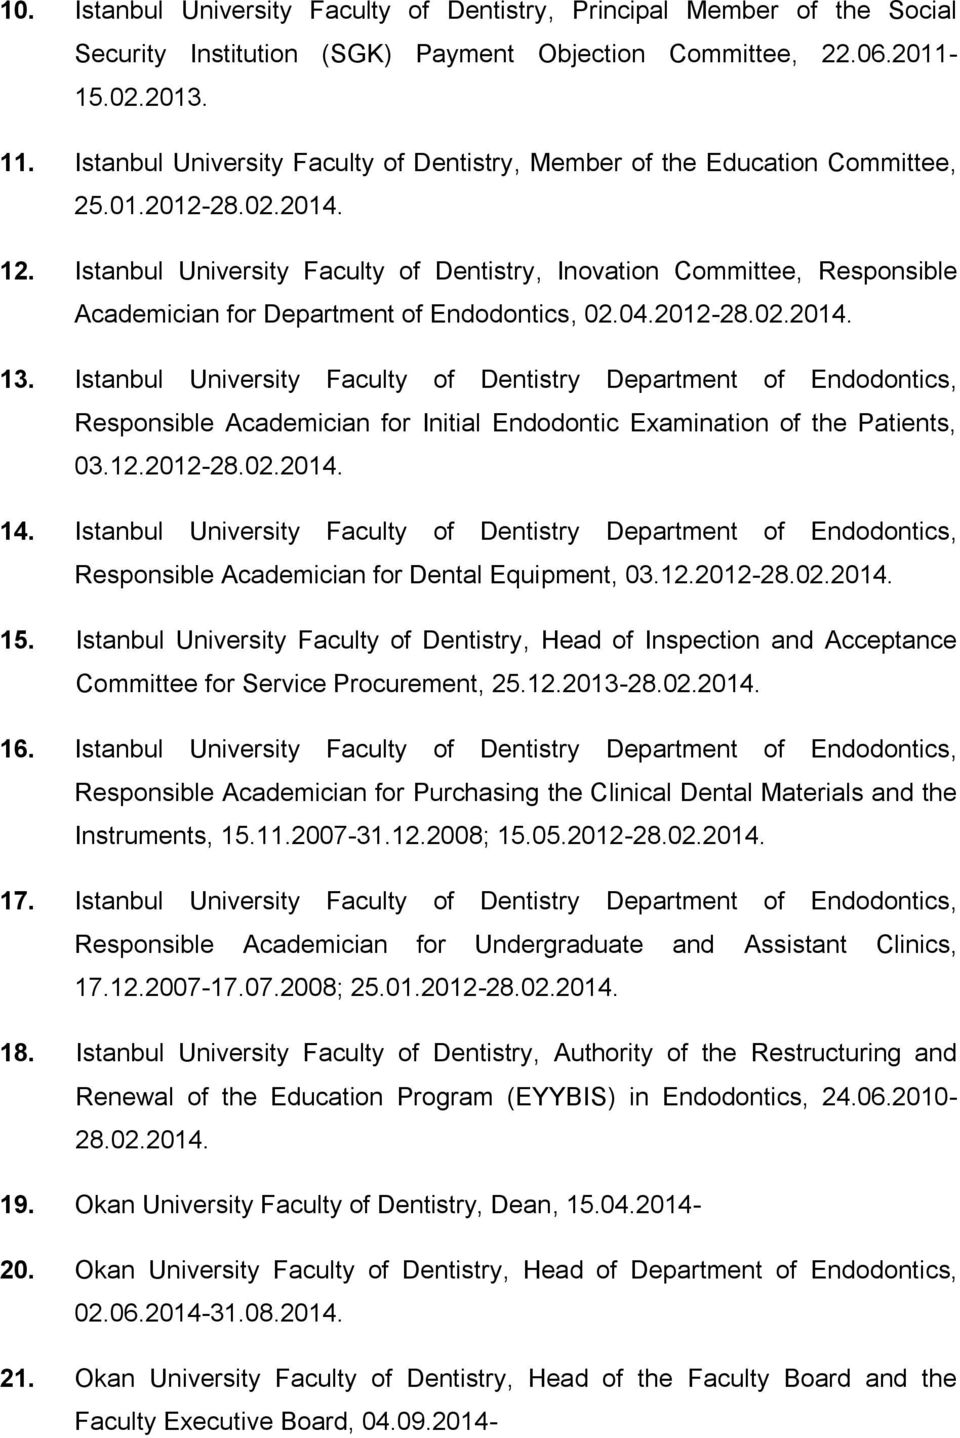 Istanbul University Faculty of Dentistry, Inovation Committee, Responsible Academician for Department of Endodontics, 02.04.2012-28.02.2014. 13.